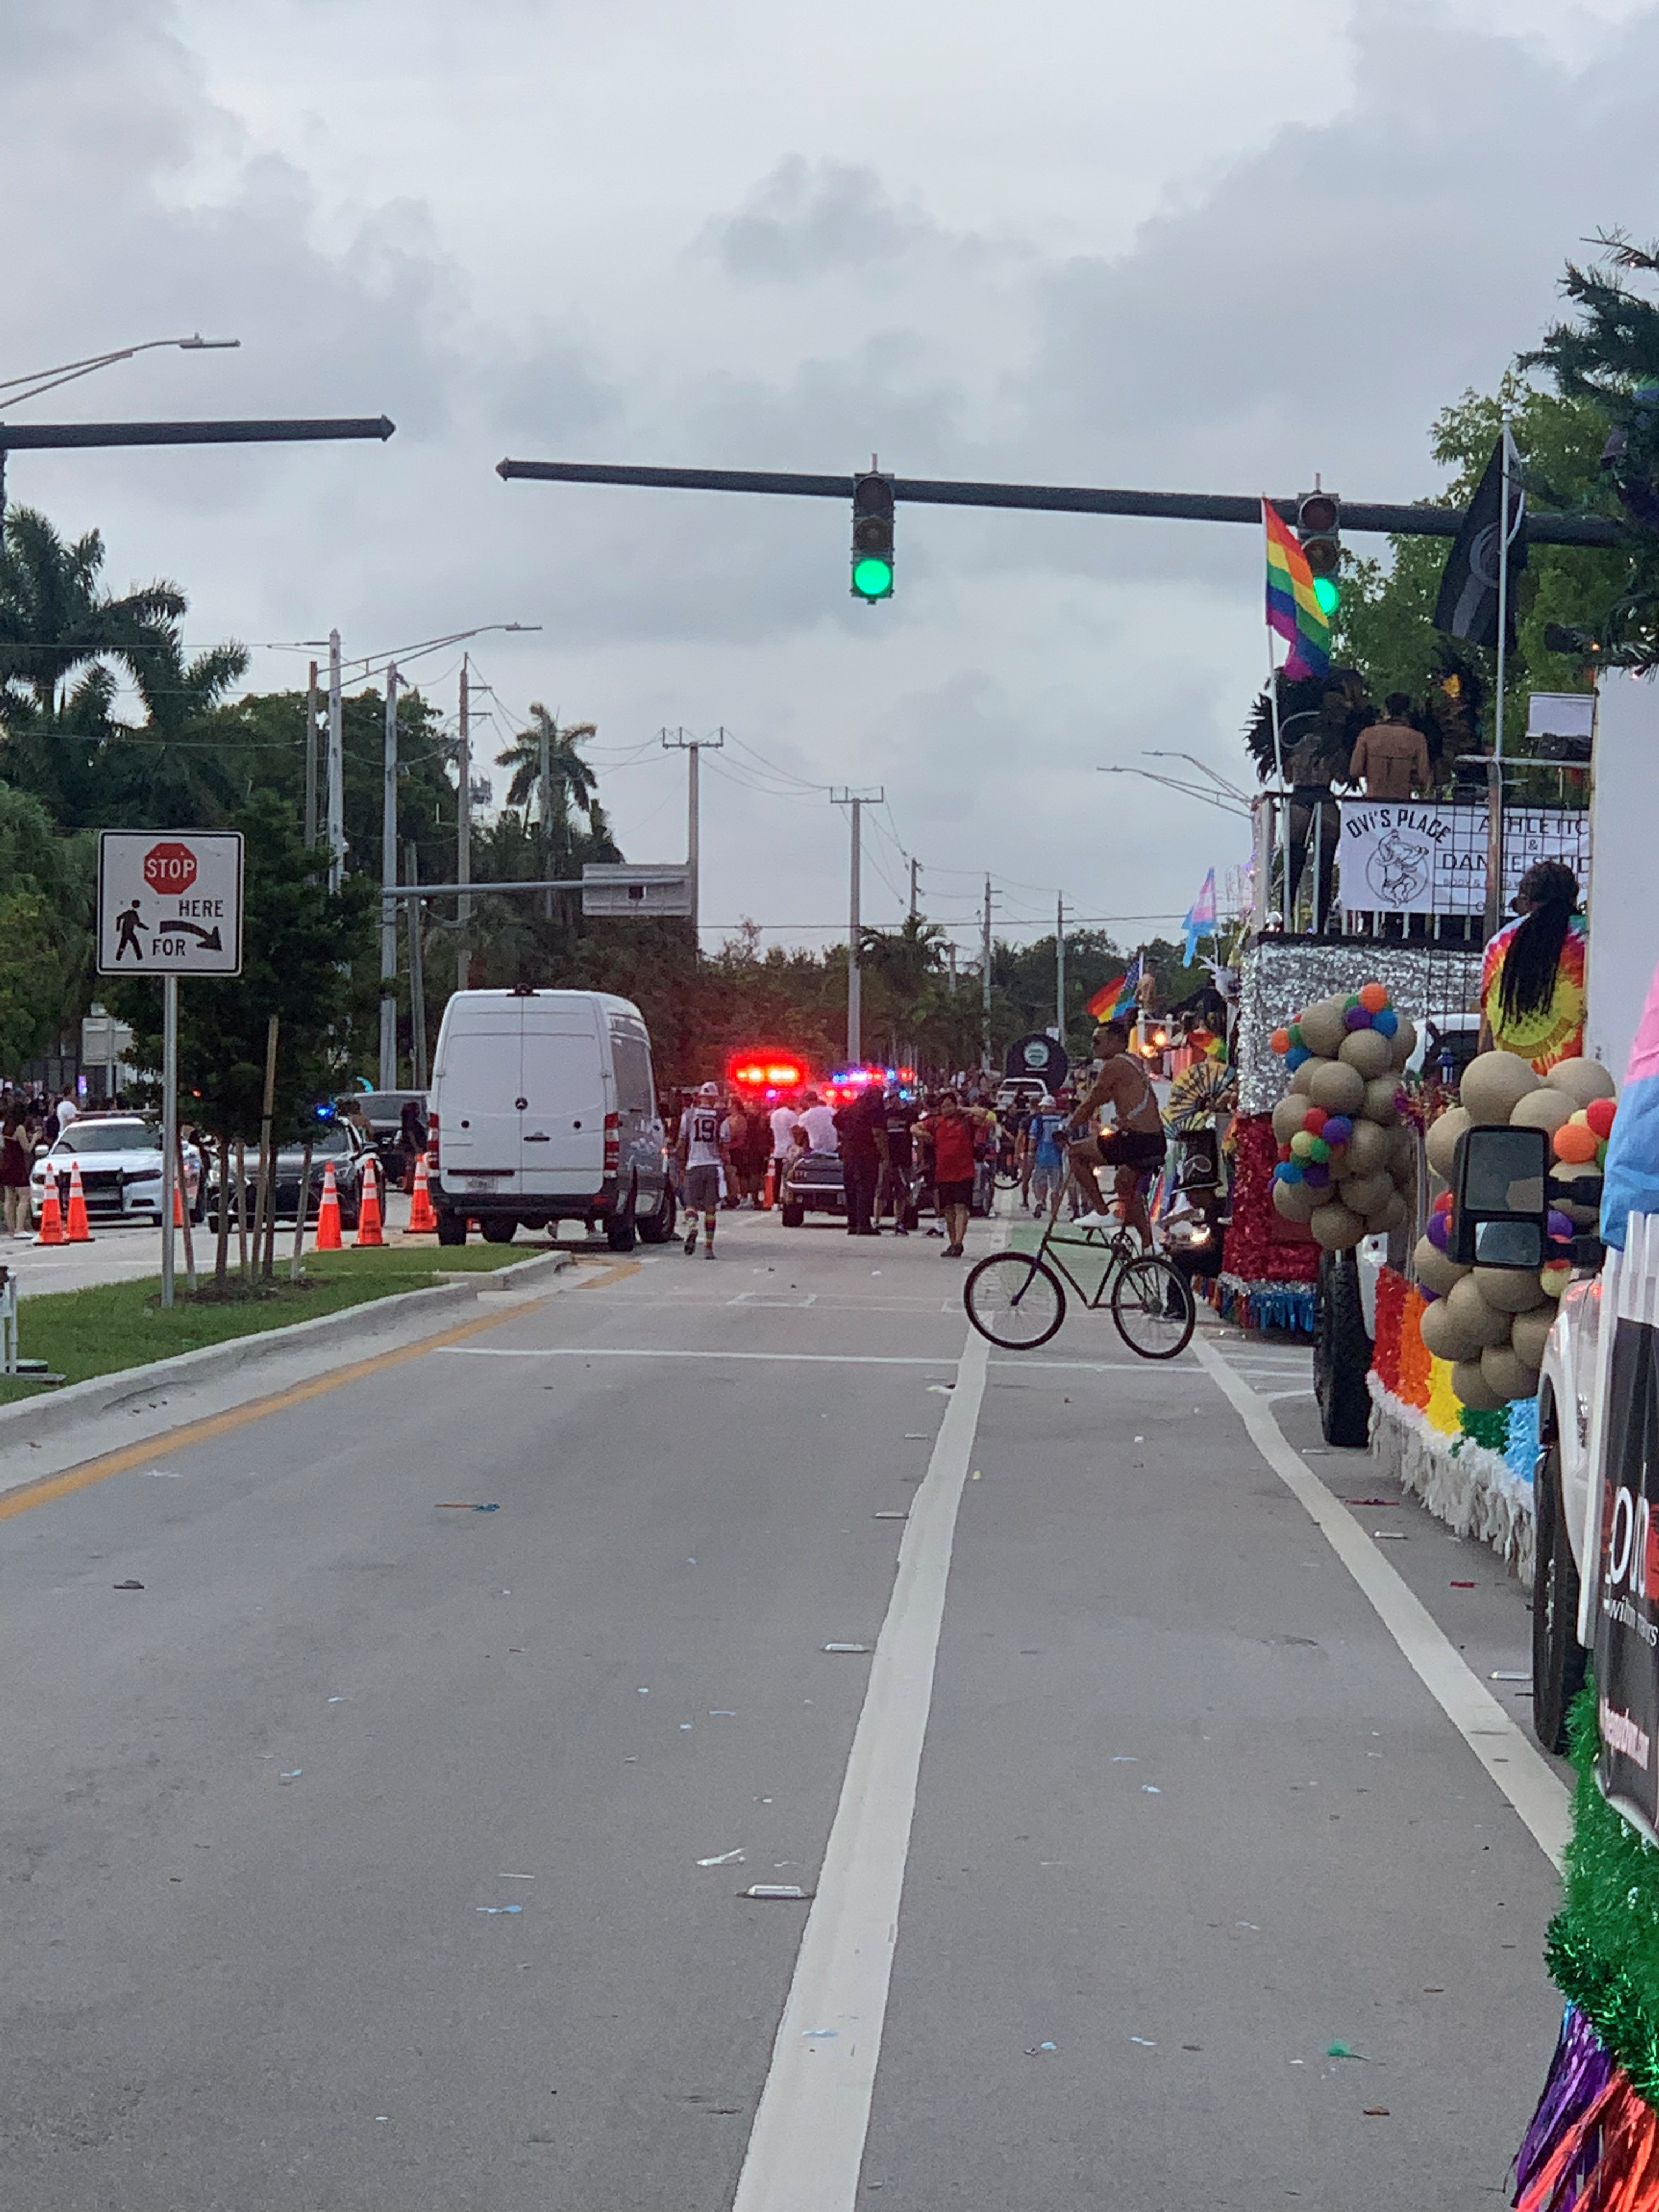 Emergency services are seen along the route of pride parade floats, in Wilton Manors, Florida, U.S. in this picture obtained from social media